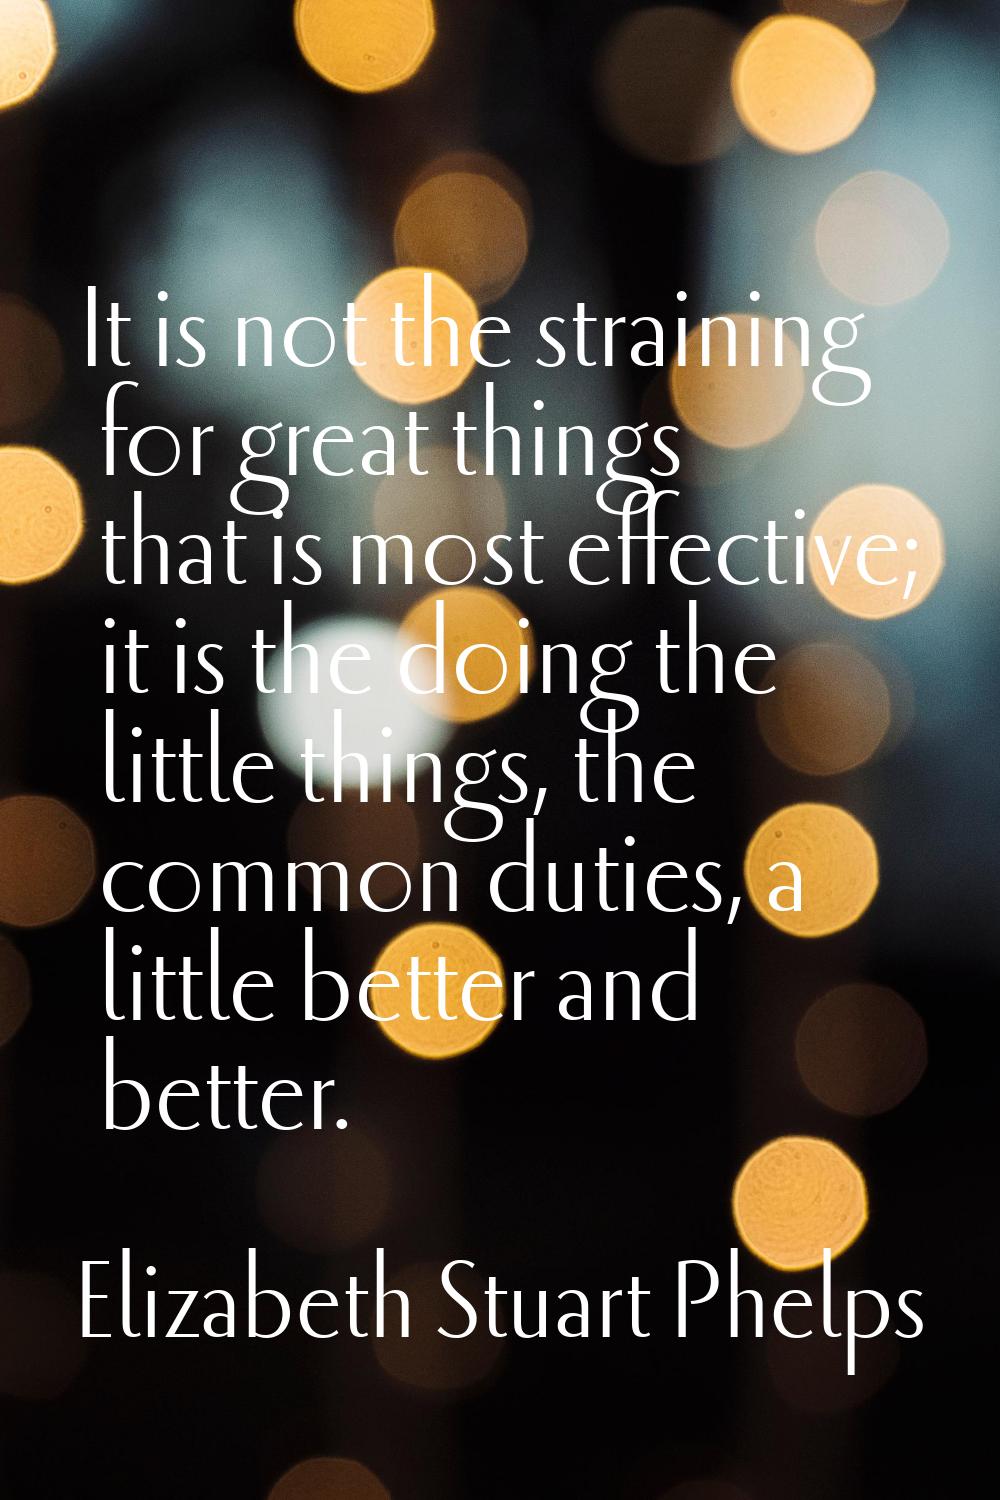 It is not the straining for great things that is most effective; it is the doing the little things,